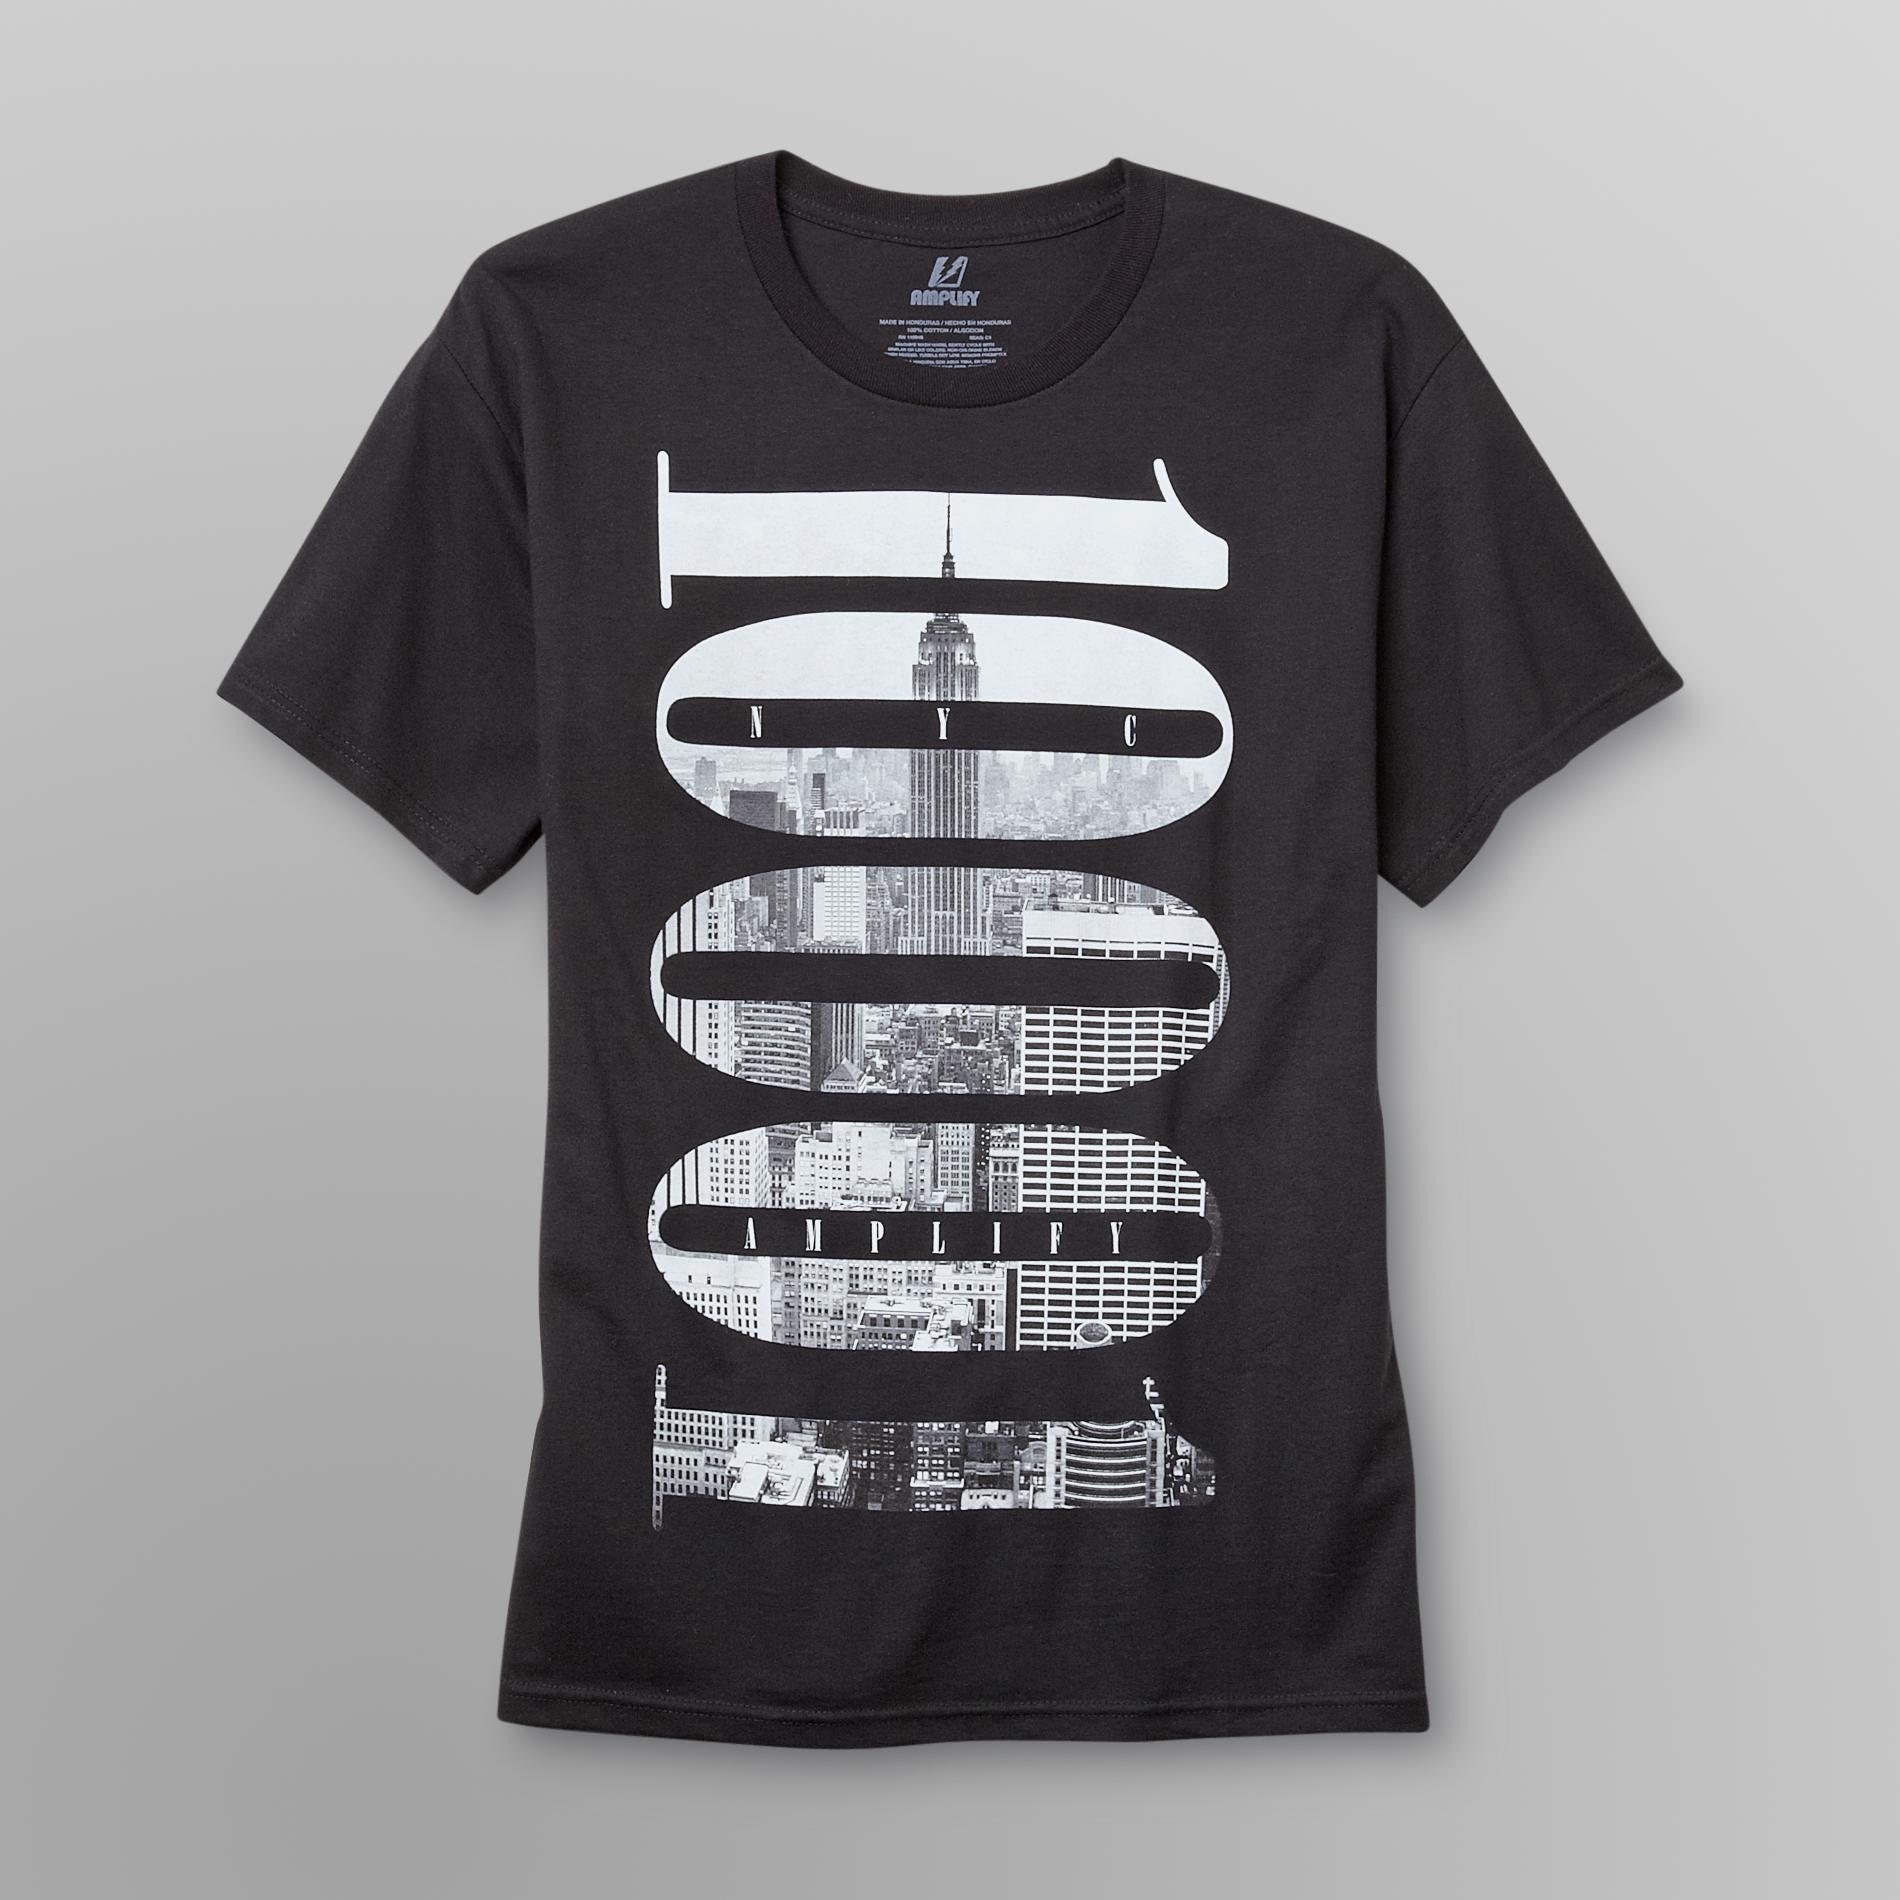 Amplify Young Men's T-Shirt - 10001/NYC